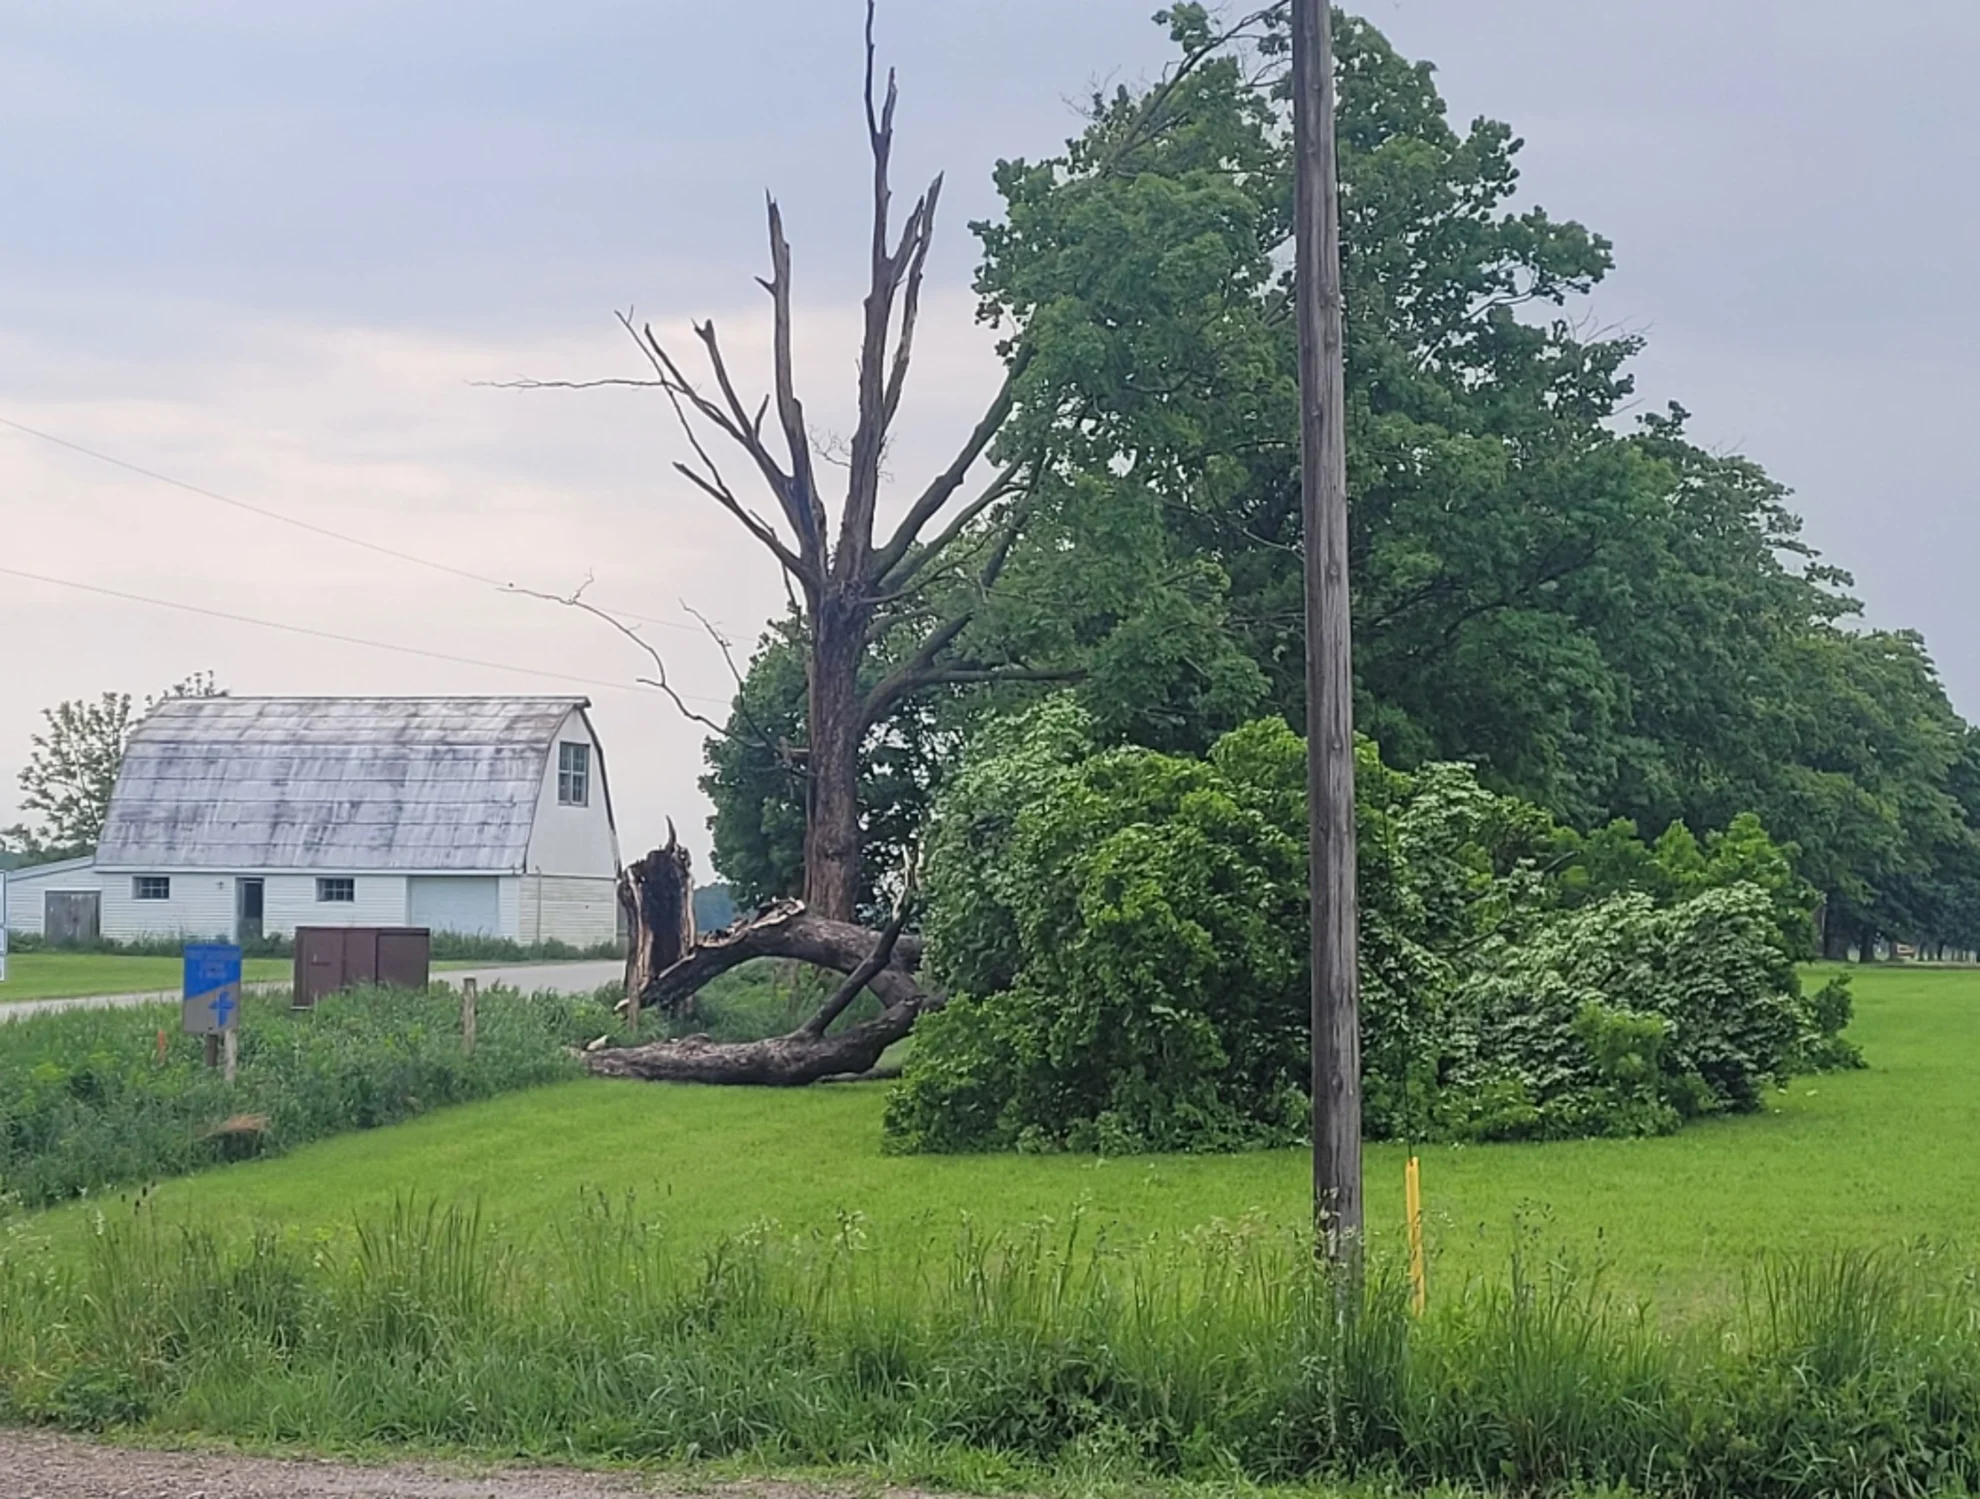 Tornado confirmed near the Ontario and Quebec border after Monday's damaging storms. See it, here